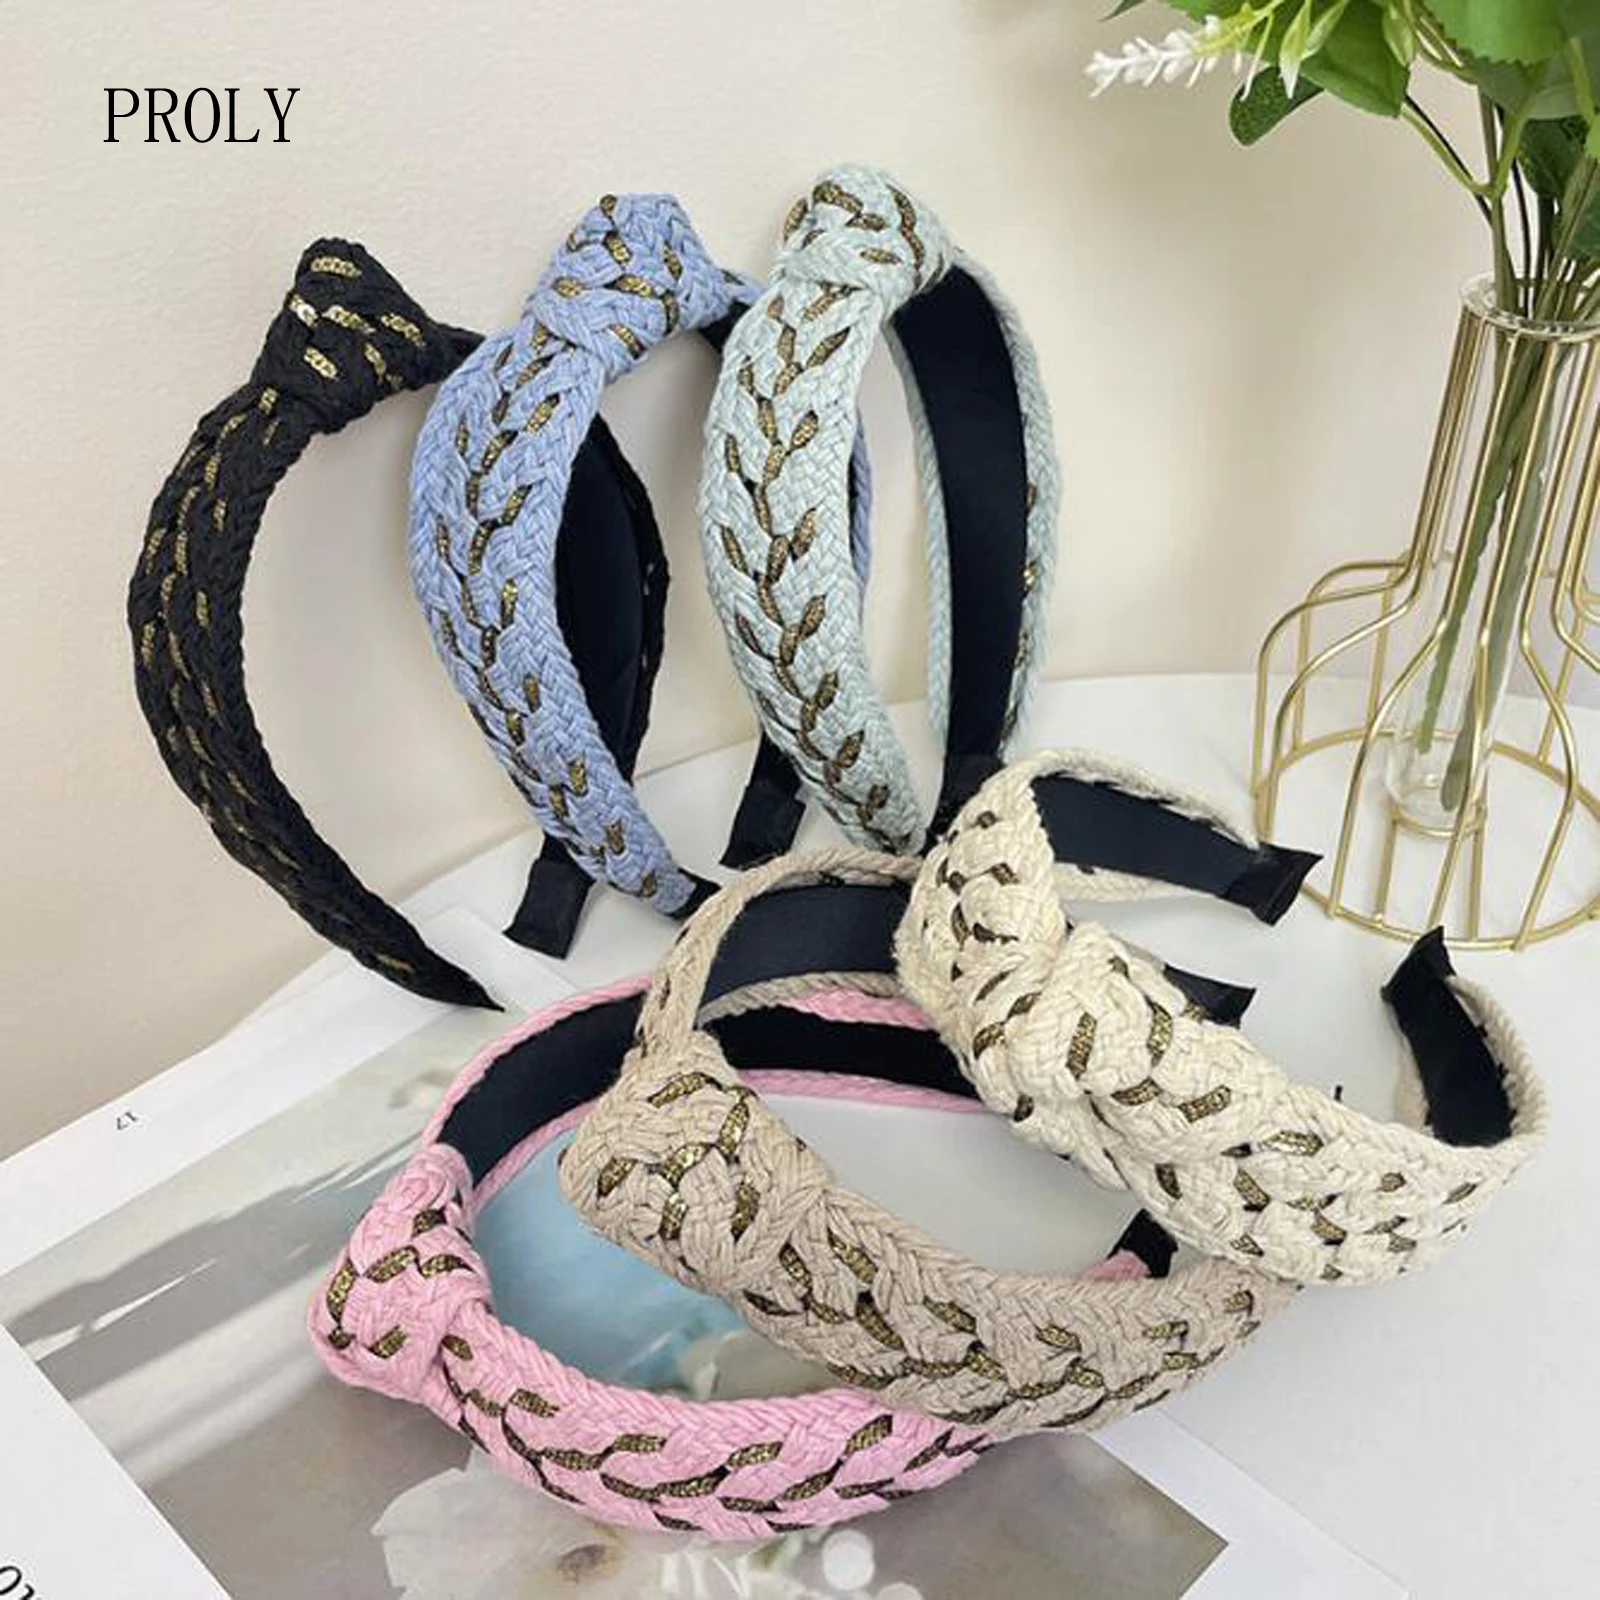 

PROLY New Fashion Hairband For Women Handmade Braided Headband Summer Center Knot Casual Headwear Hair Accessories Wholesale